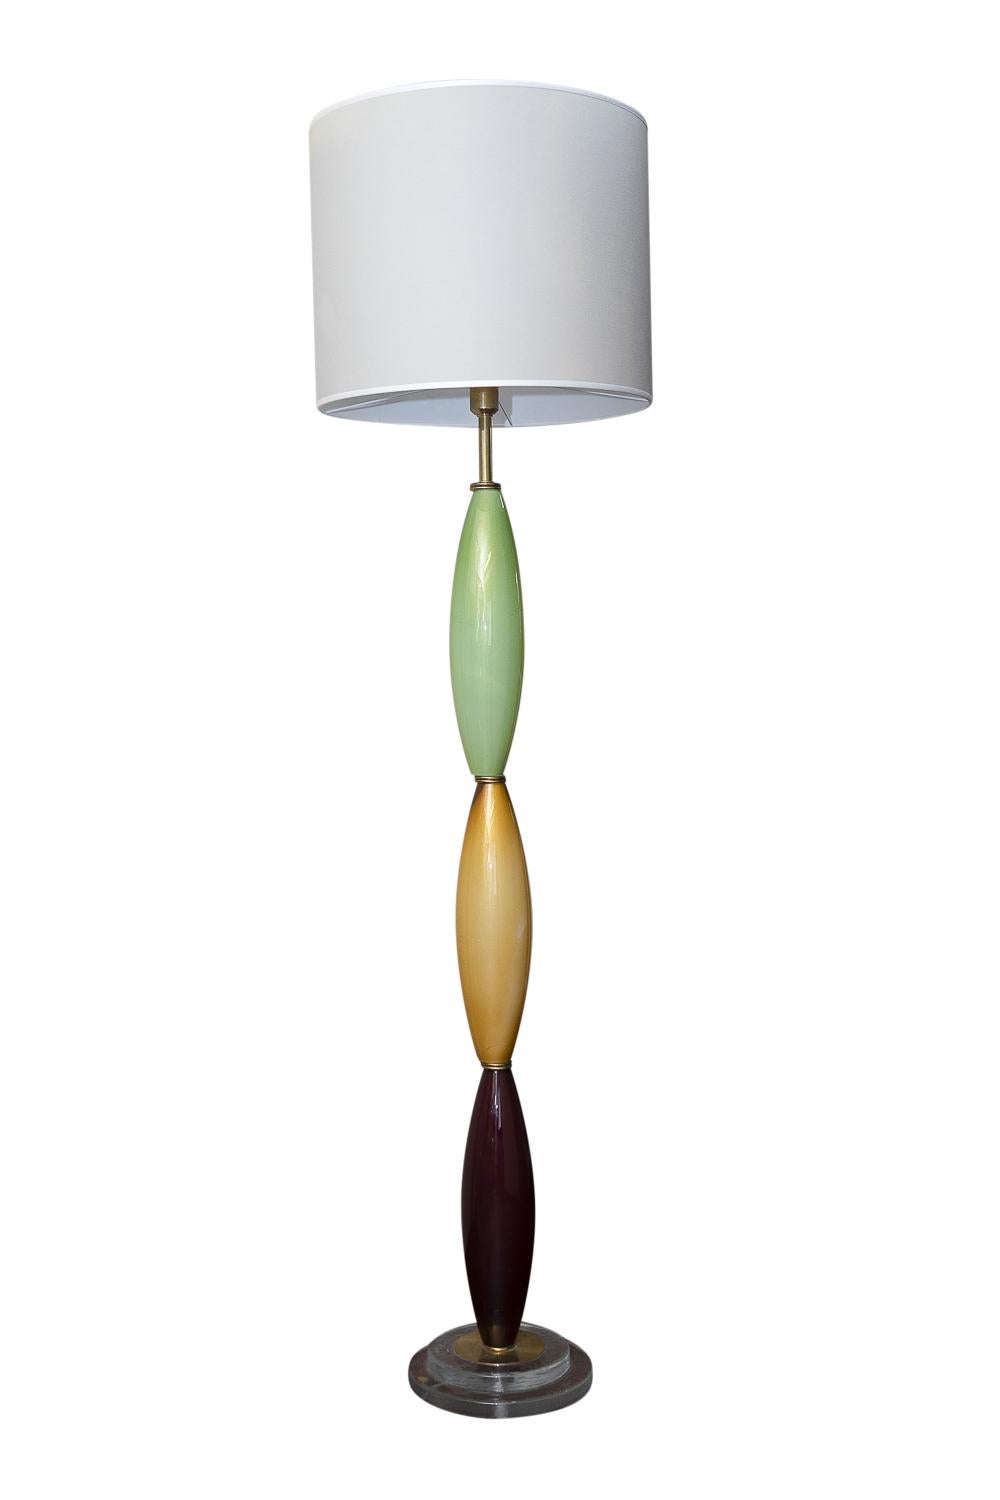 Beautiful floor lamp realized in Venetian glass and handmade in Italy by a Craftman.
Recent production
Price not include the shade.